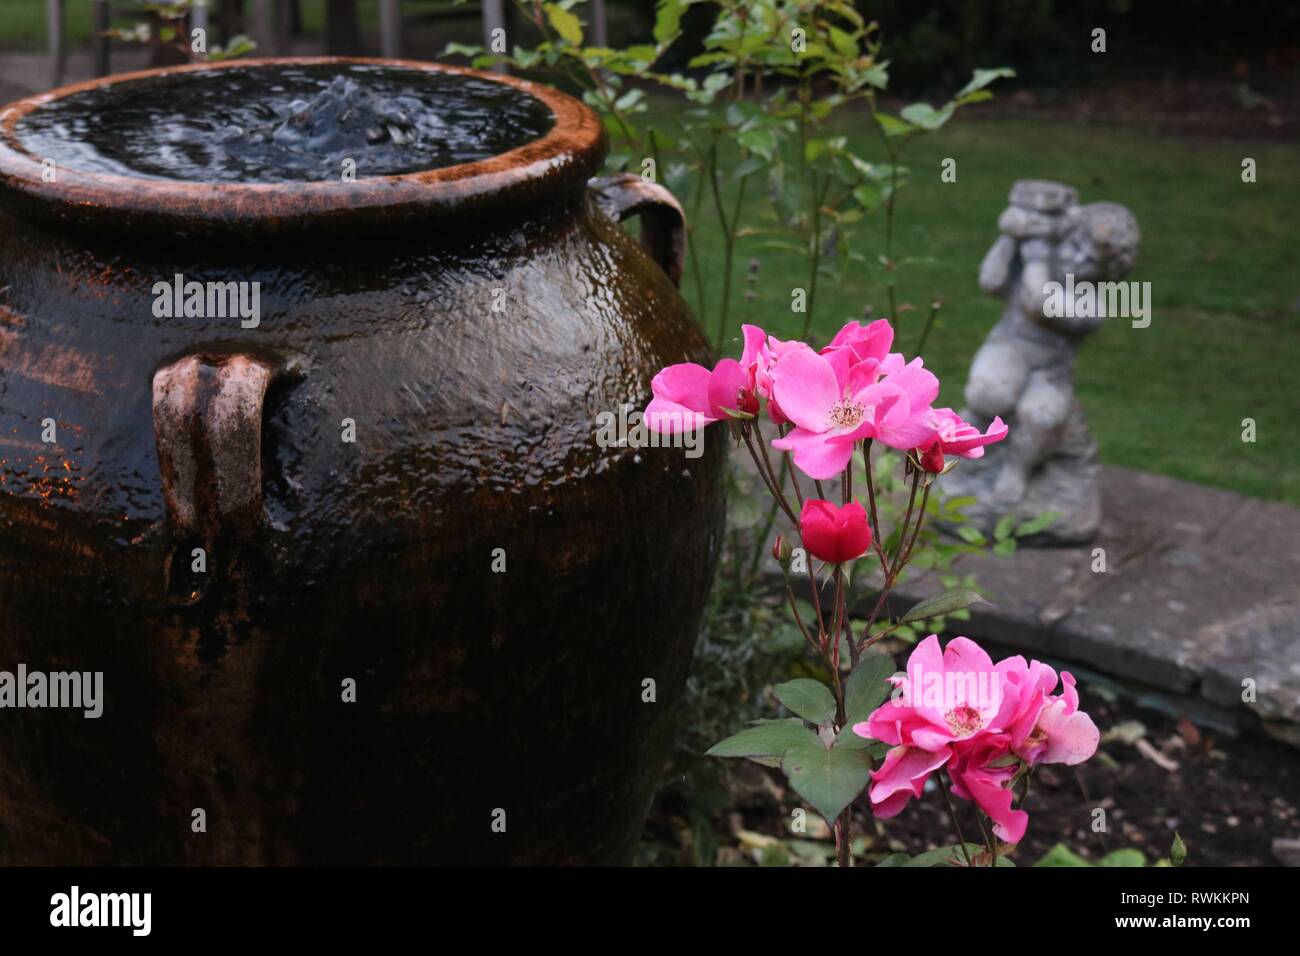 Pink roses growing beside a large terracotta olive oil jar style fountain urn with small grey cherub statue in background Stock Photo